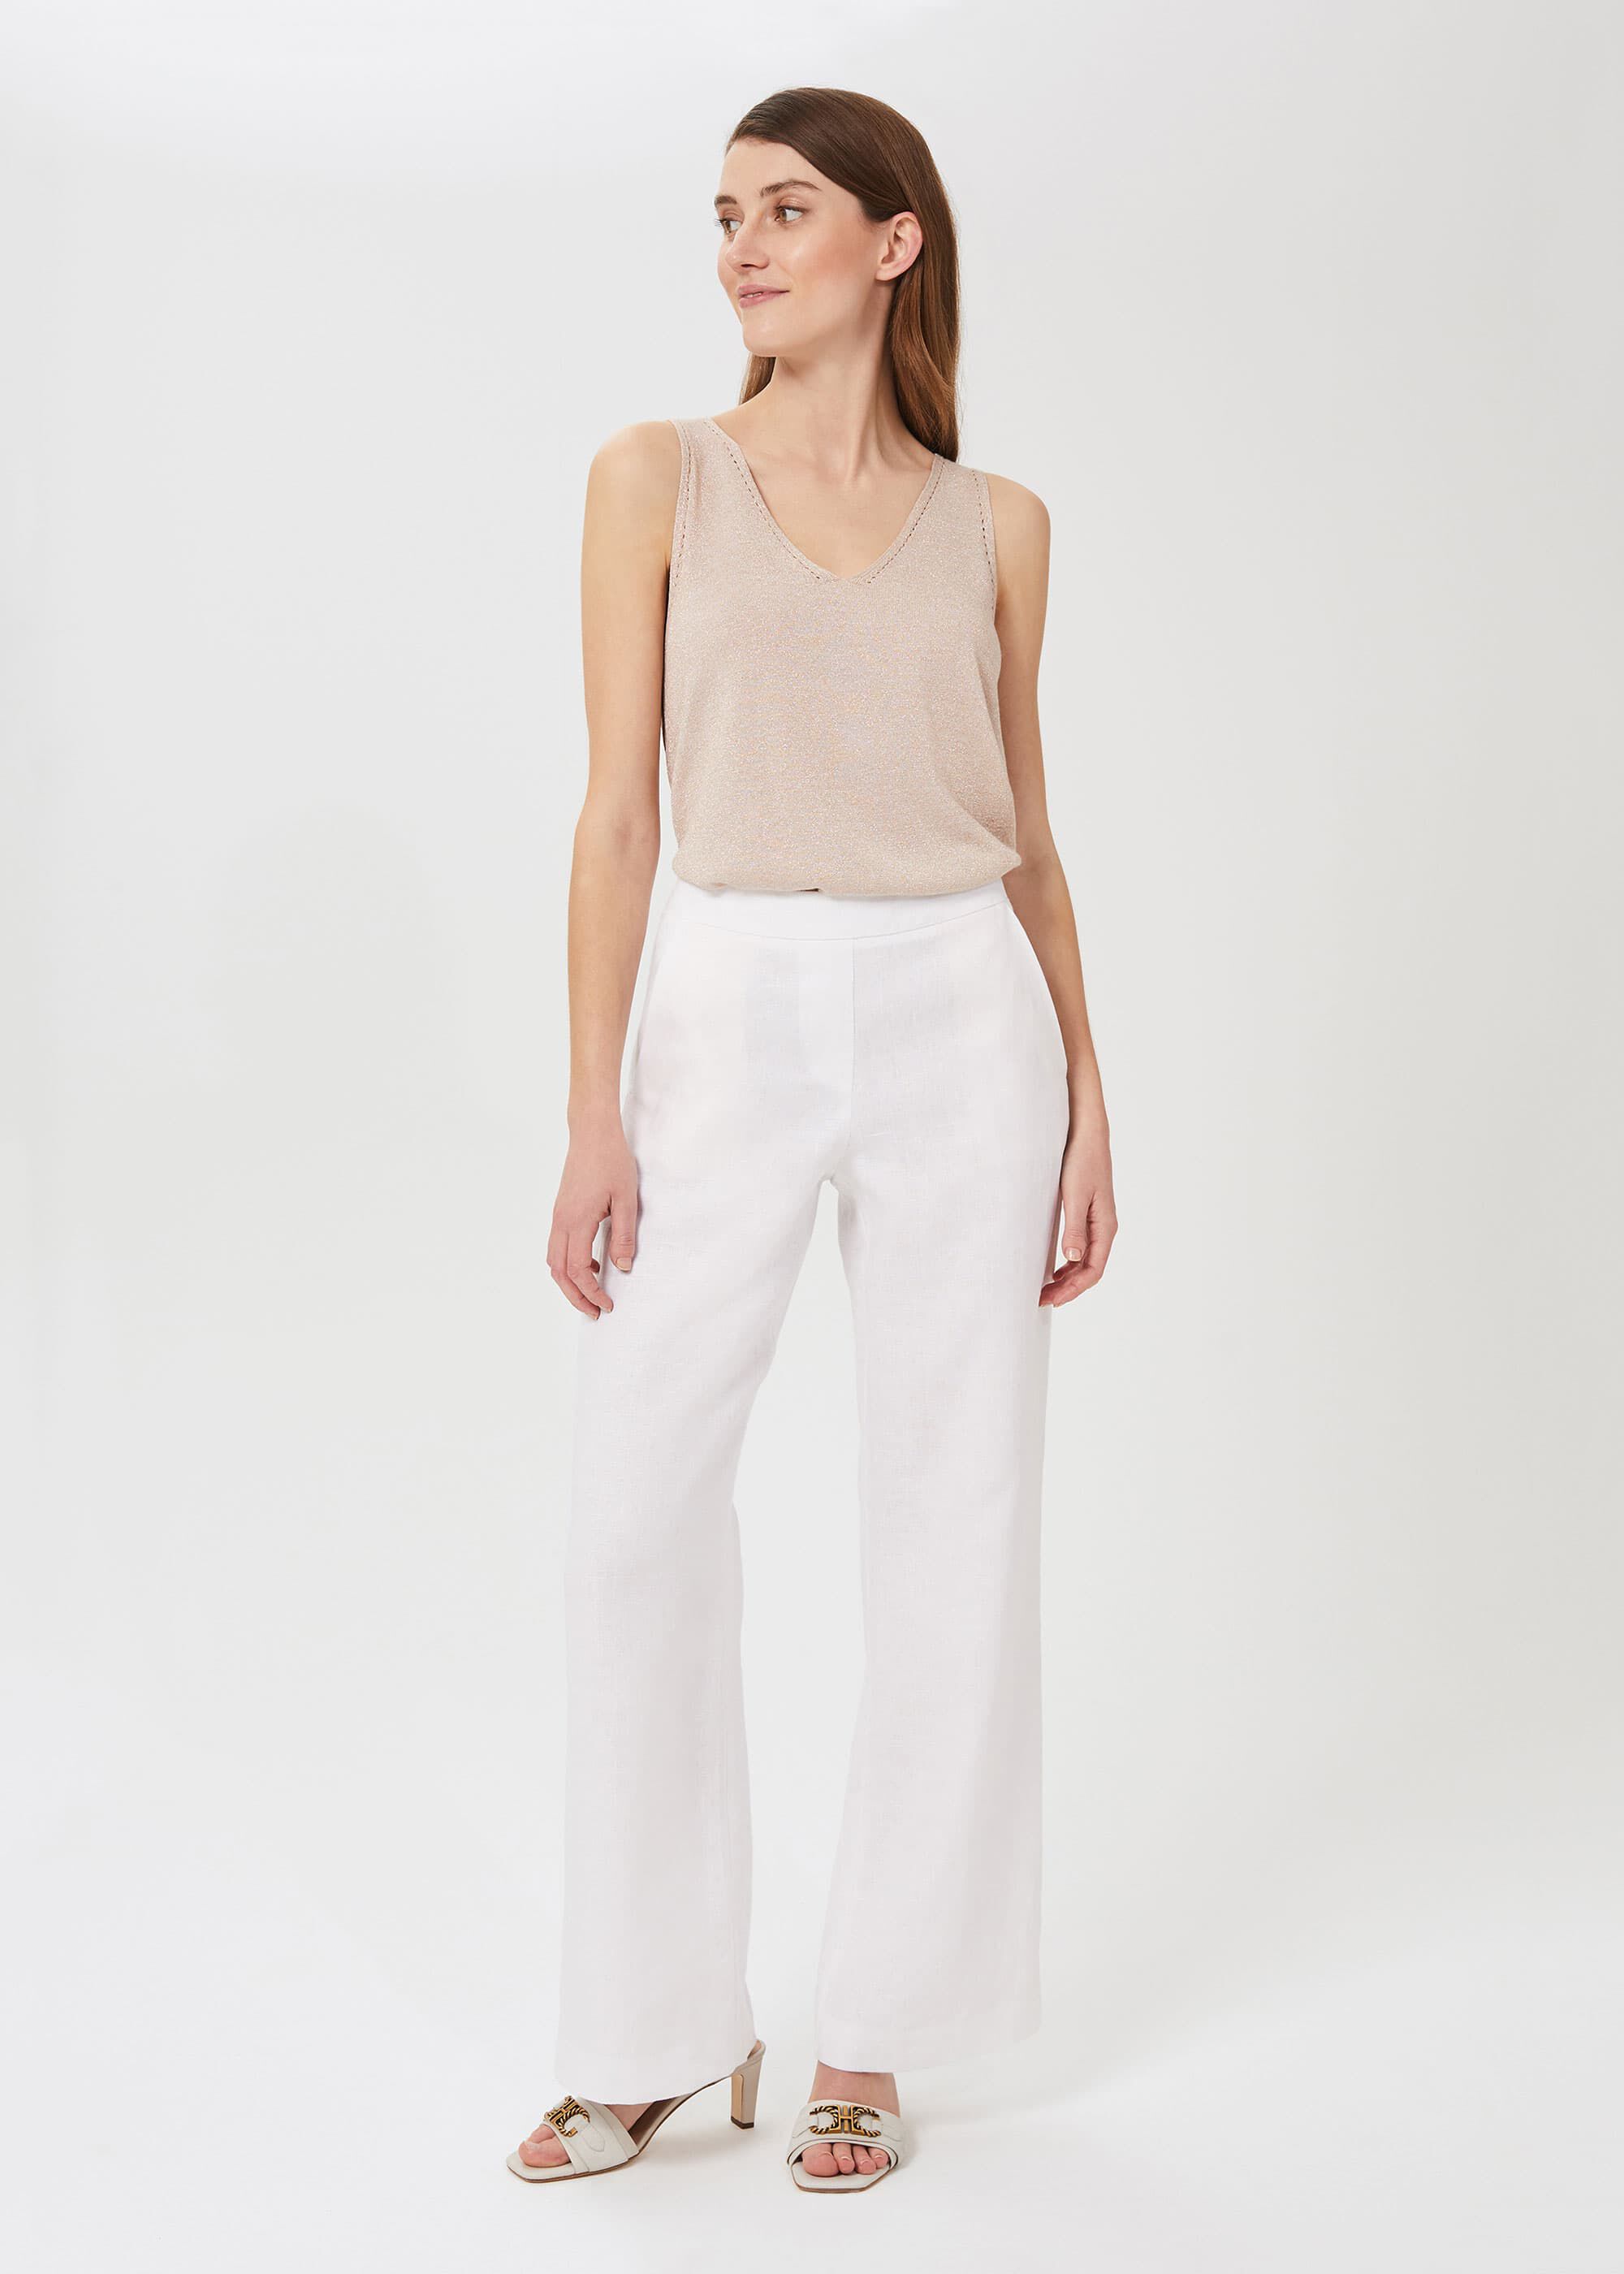 Tailored Matte White Linen Trousers